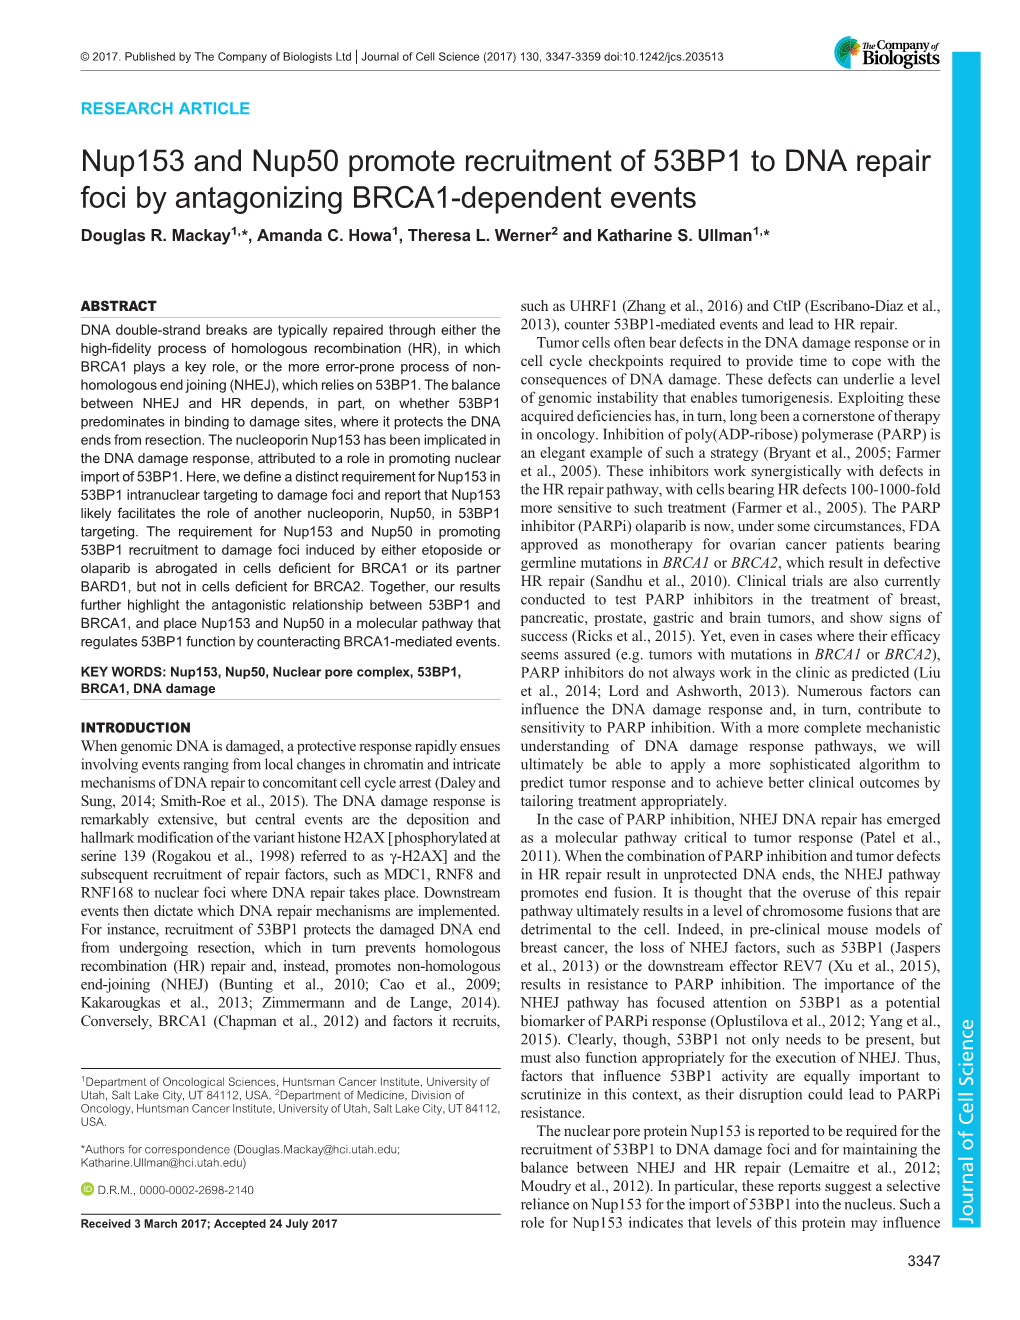 Nup153 and Nup50 Promote Recruitment of 53BP1 to DNA Repair Foci by Antagonizing BRCA1-Dependent Events Douglas R